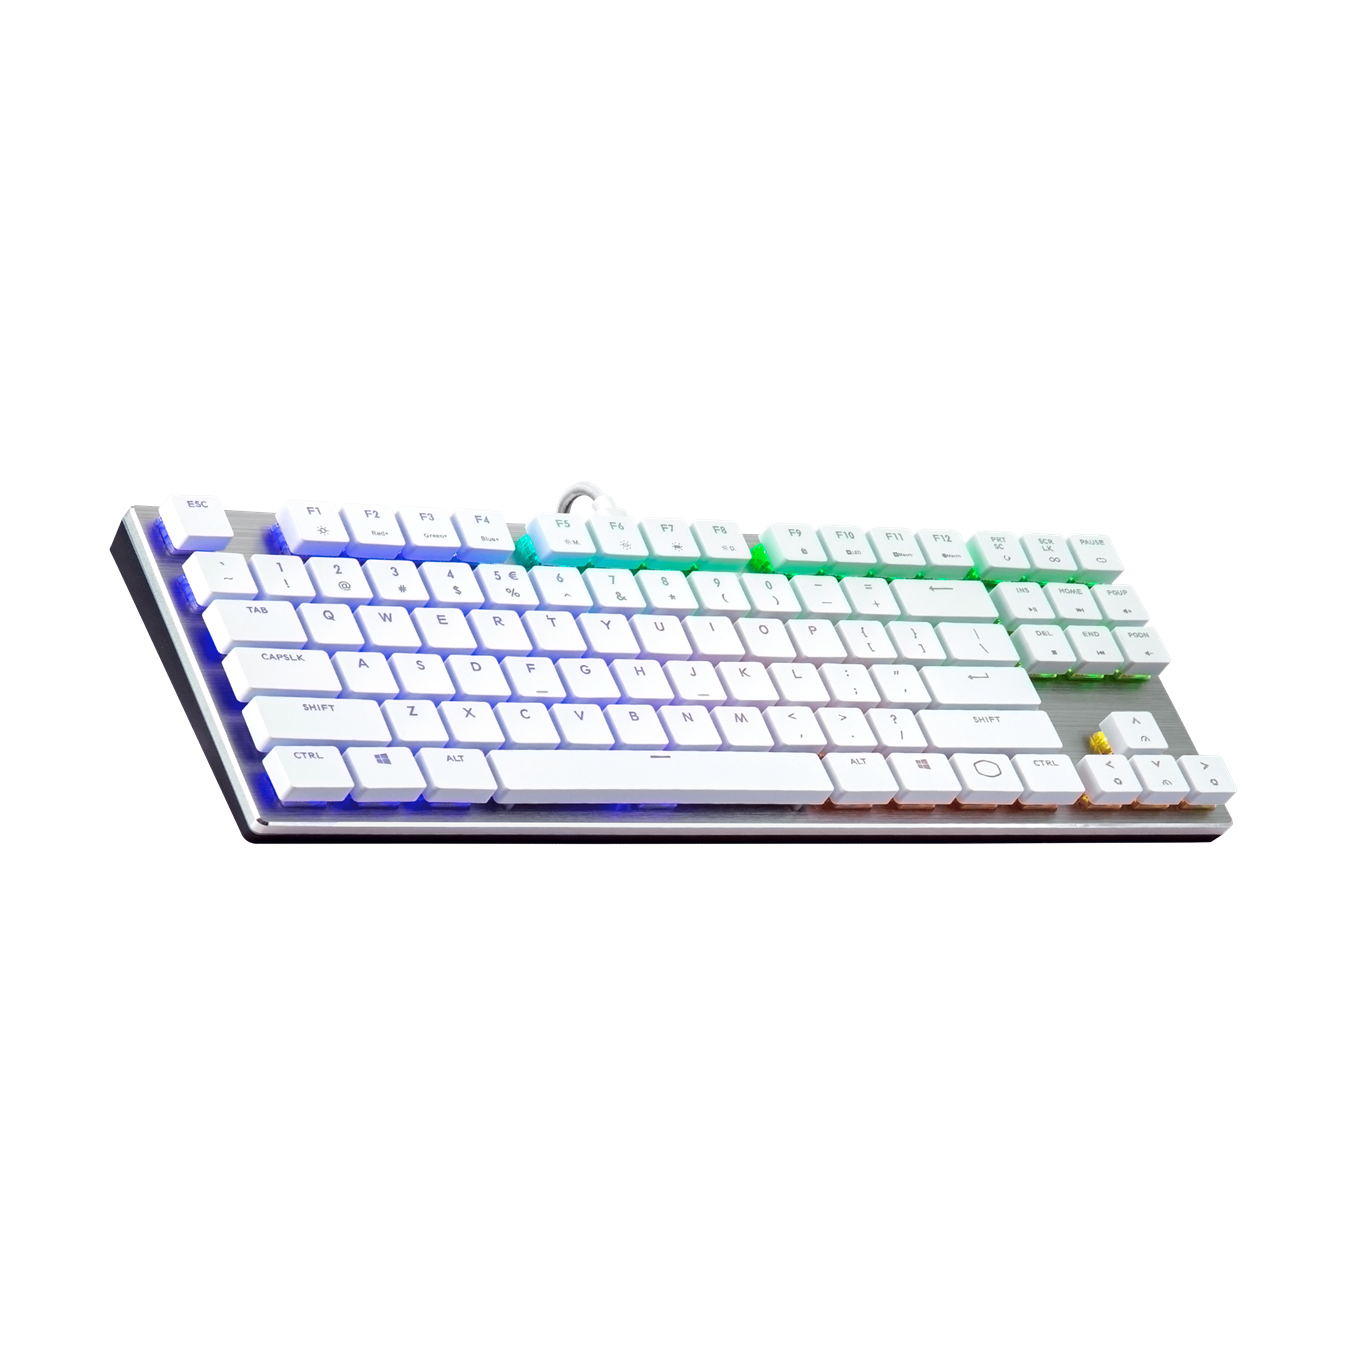 SK630 White Limited Edition Mechanical Keyboard - tsports a bold new look for mechanical keyboards with new Cherry MX Low Profile switches